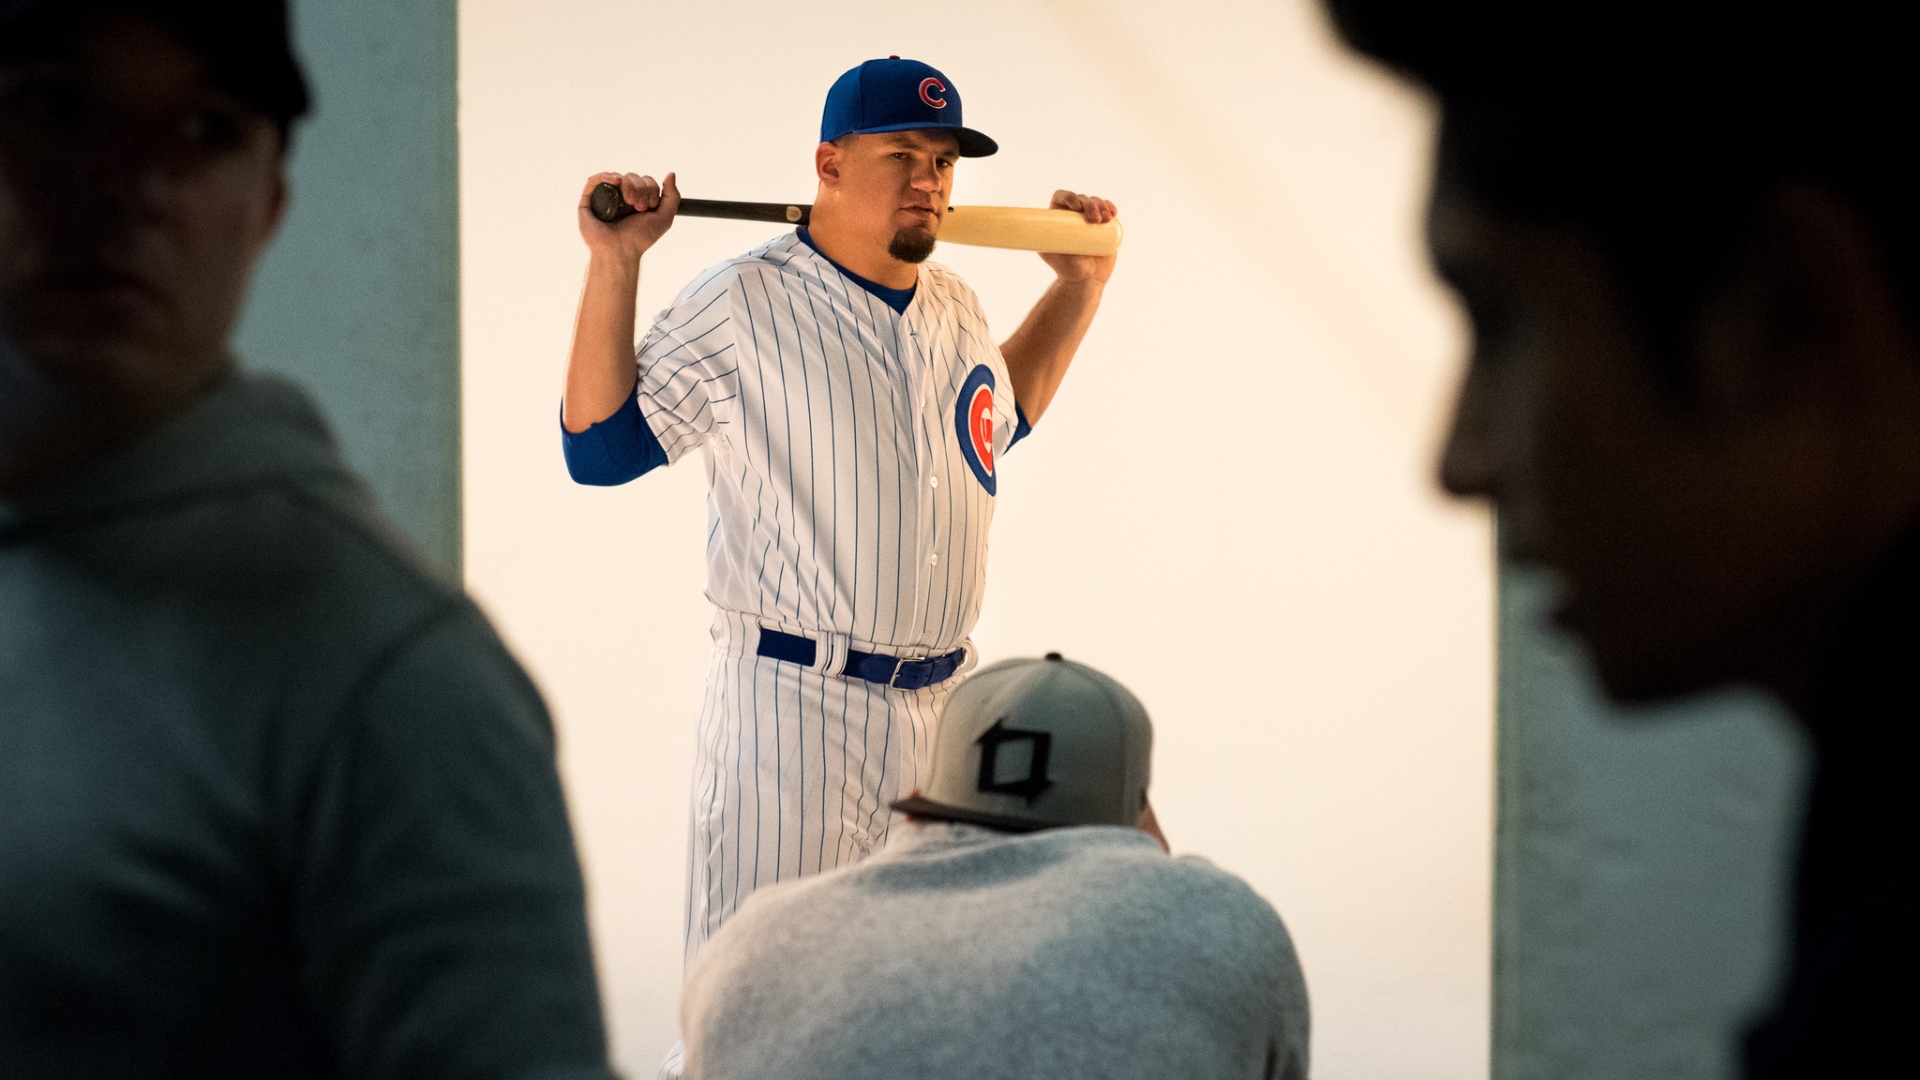 Kyle Schwarber has not been medically cleared to play the outfield